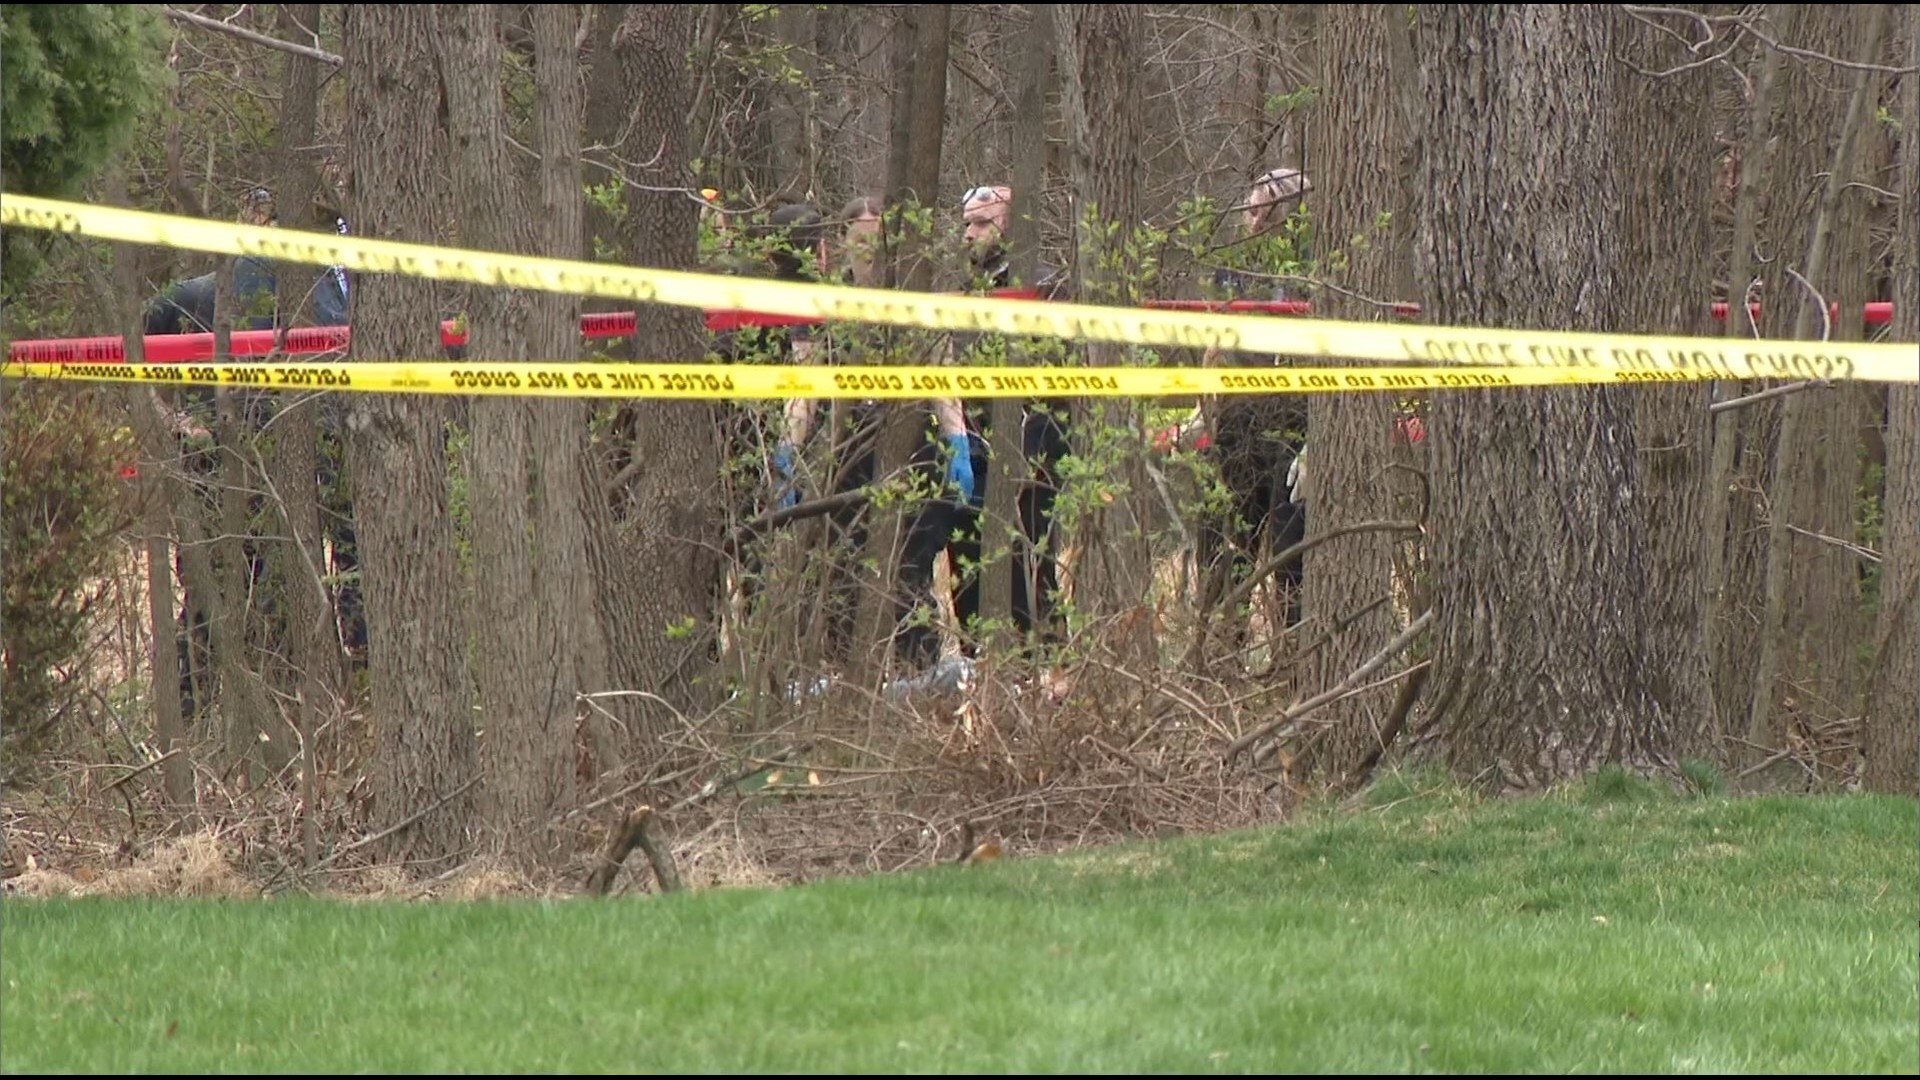 Police are investigating after two dead bodies were found on a trail in Reston, Virginia on Wednesday afternoon.